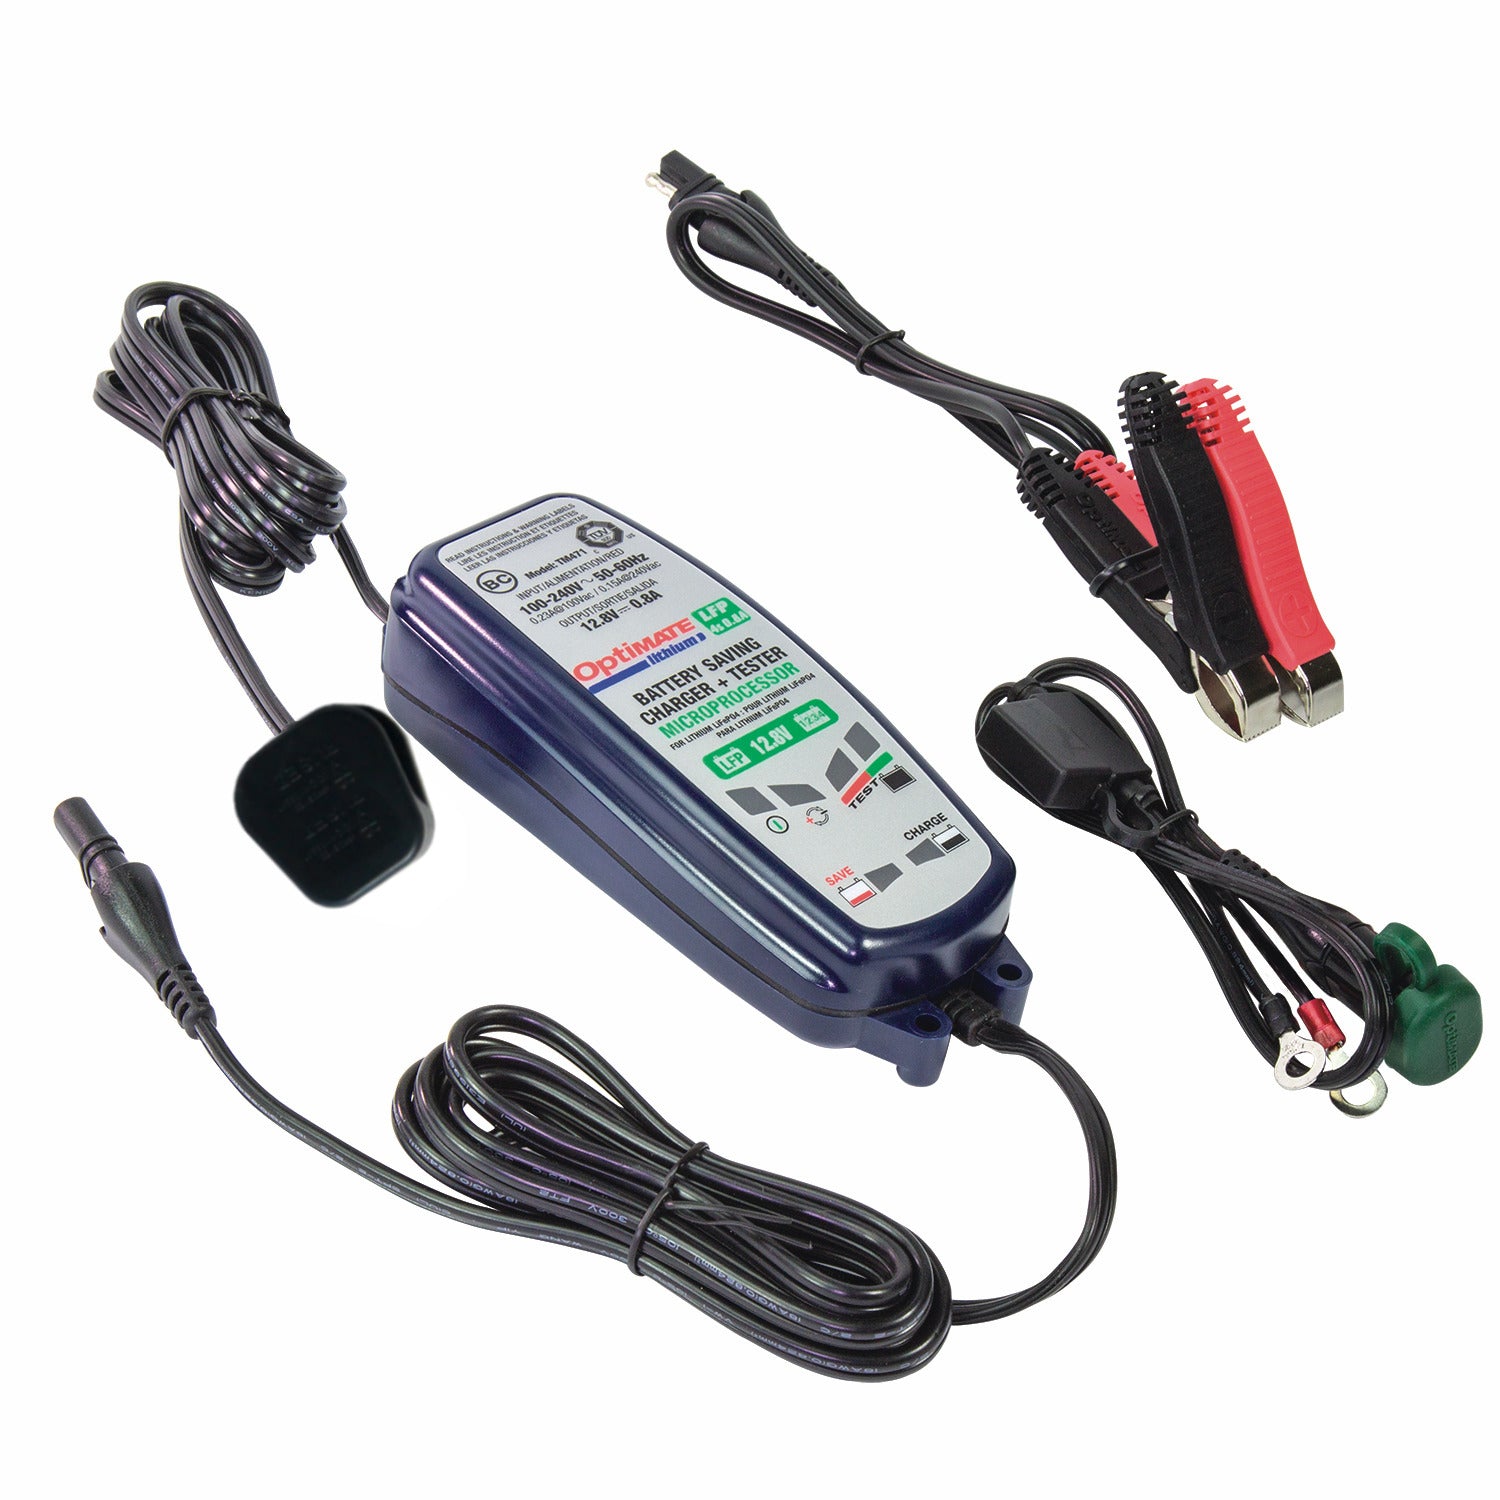 Optimate Lithium 0.8A 12.8V Battery Charger and Optimiser - 0